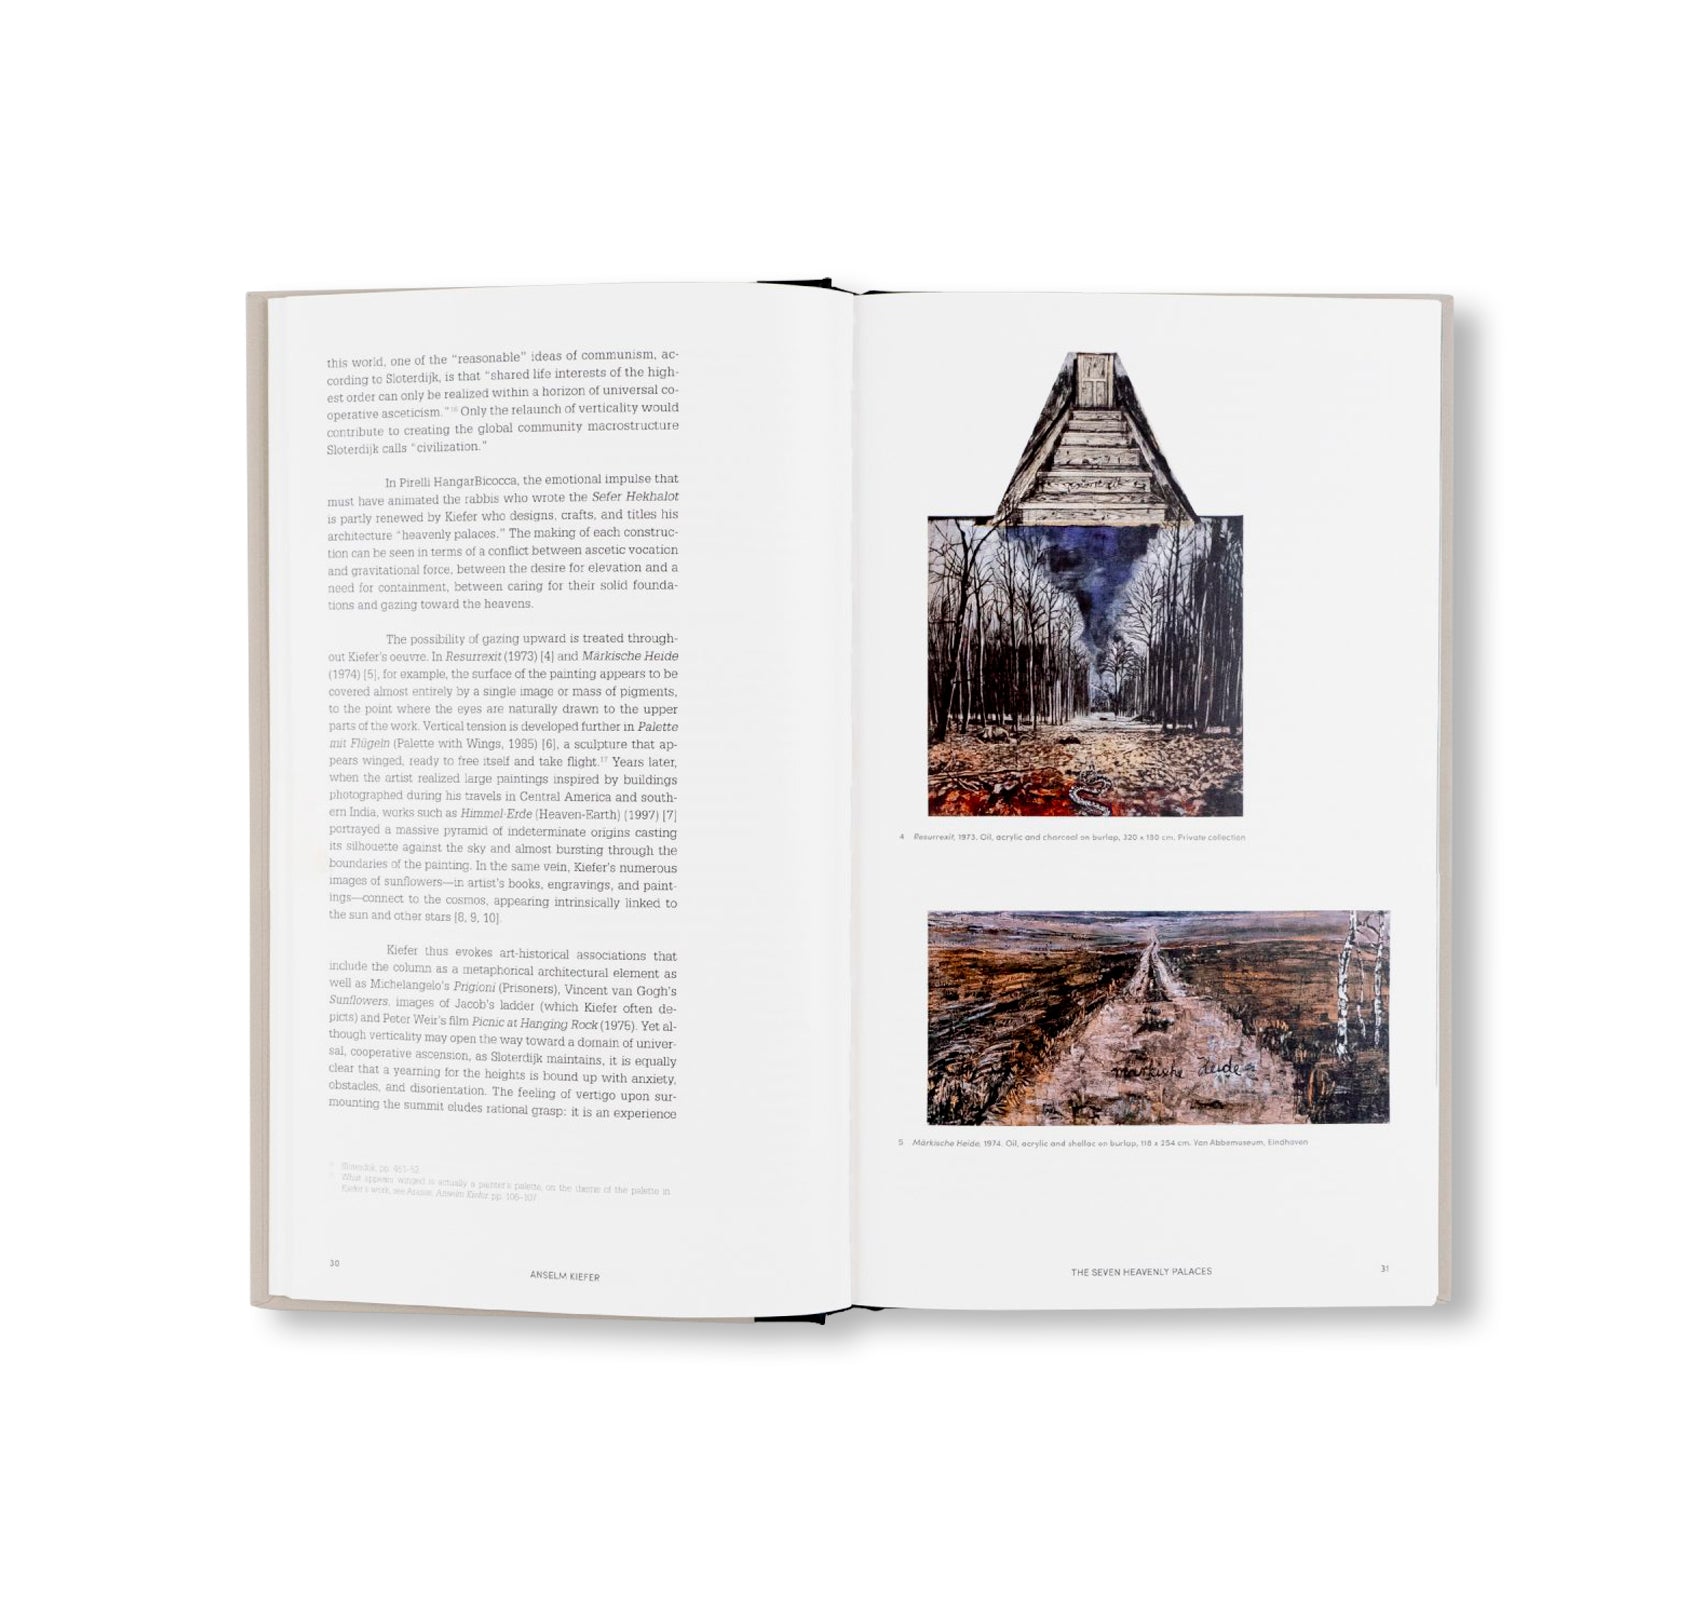 THE SEVEN HEAVENLY PALACES by Anselm Kiefer